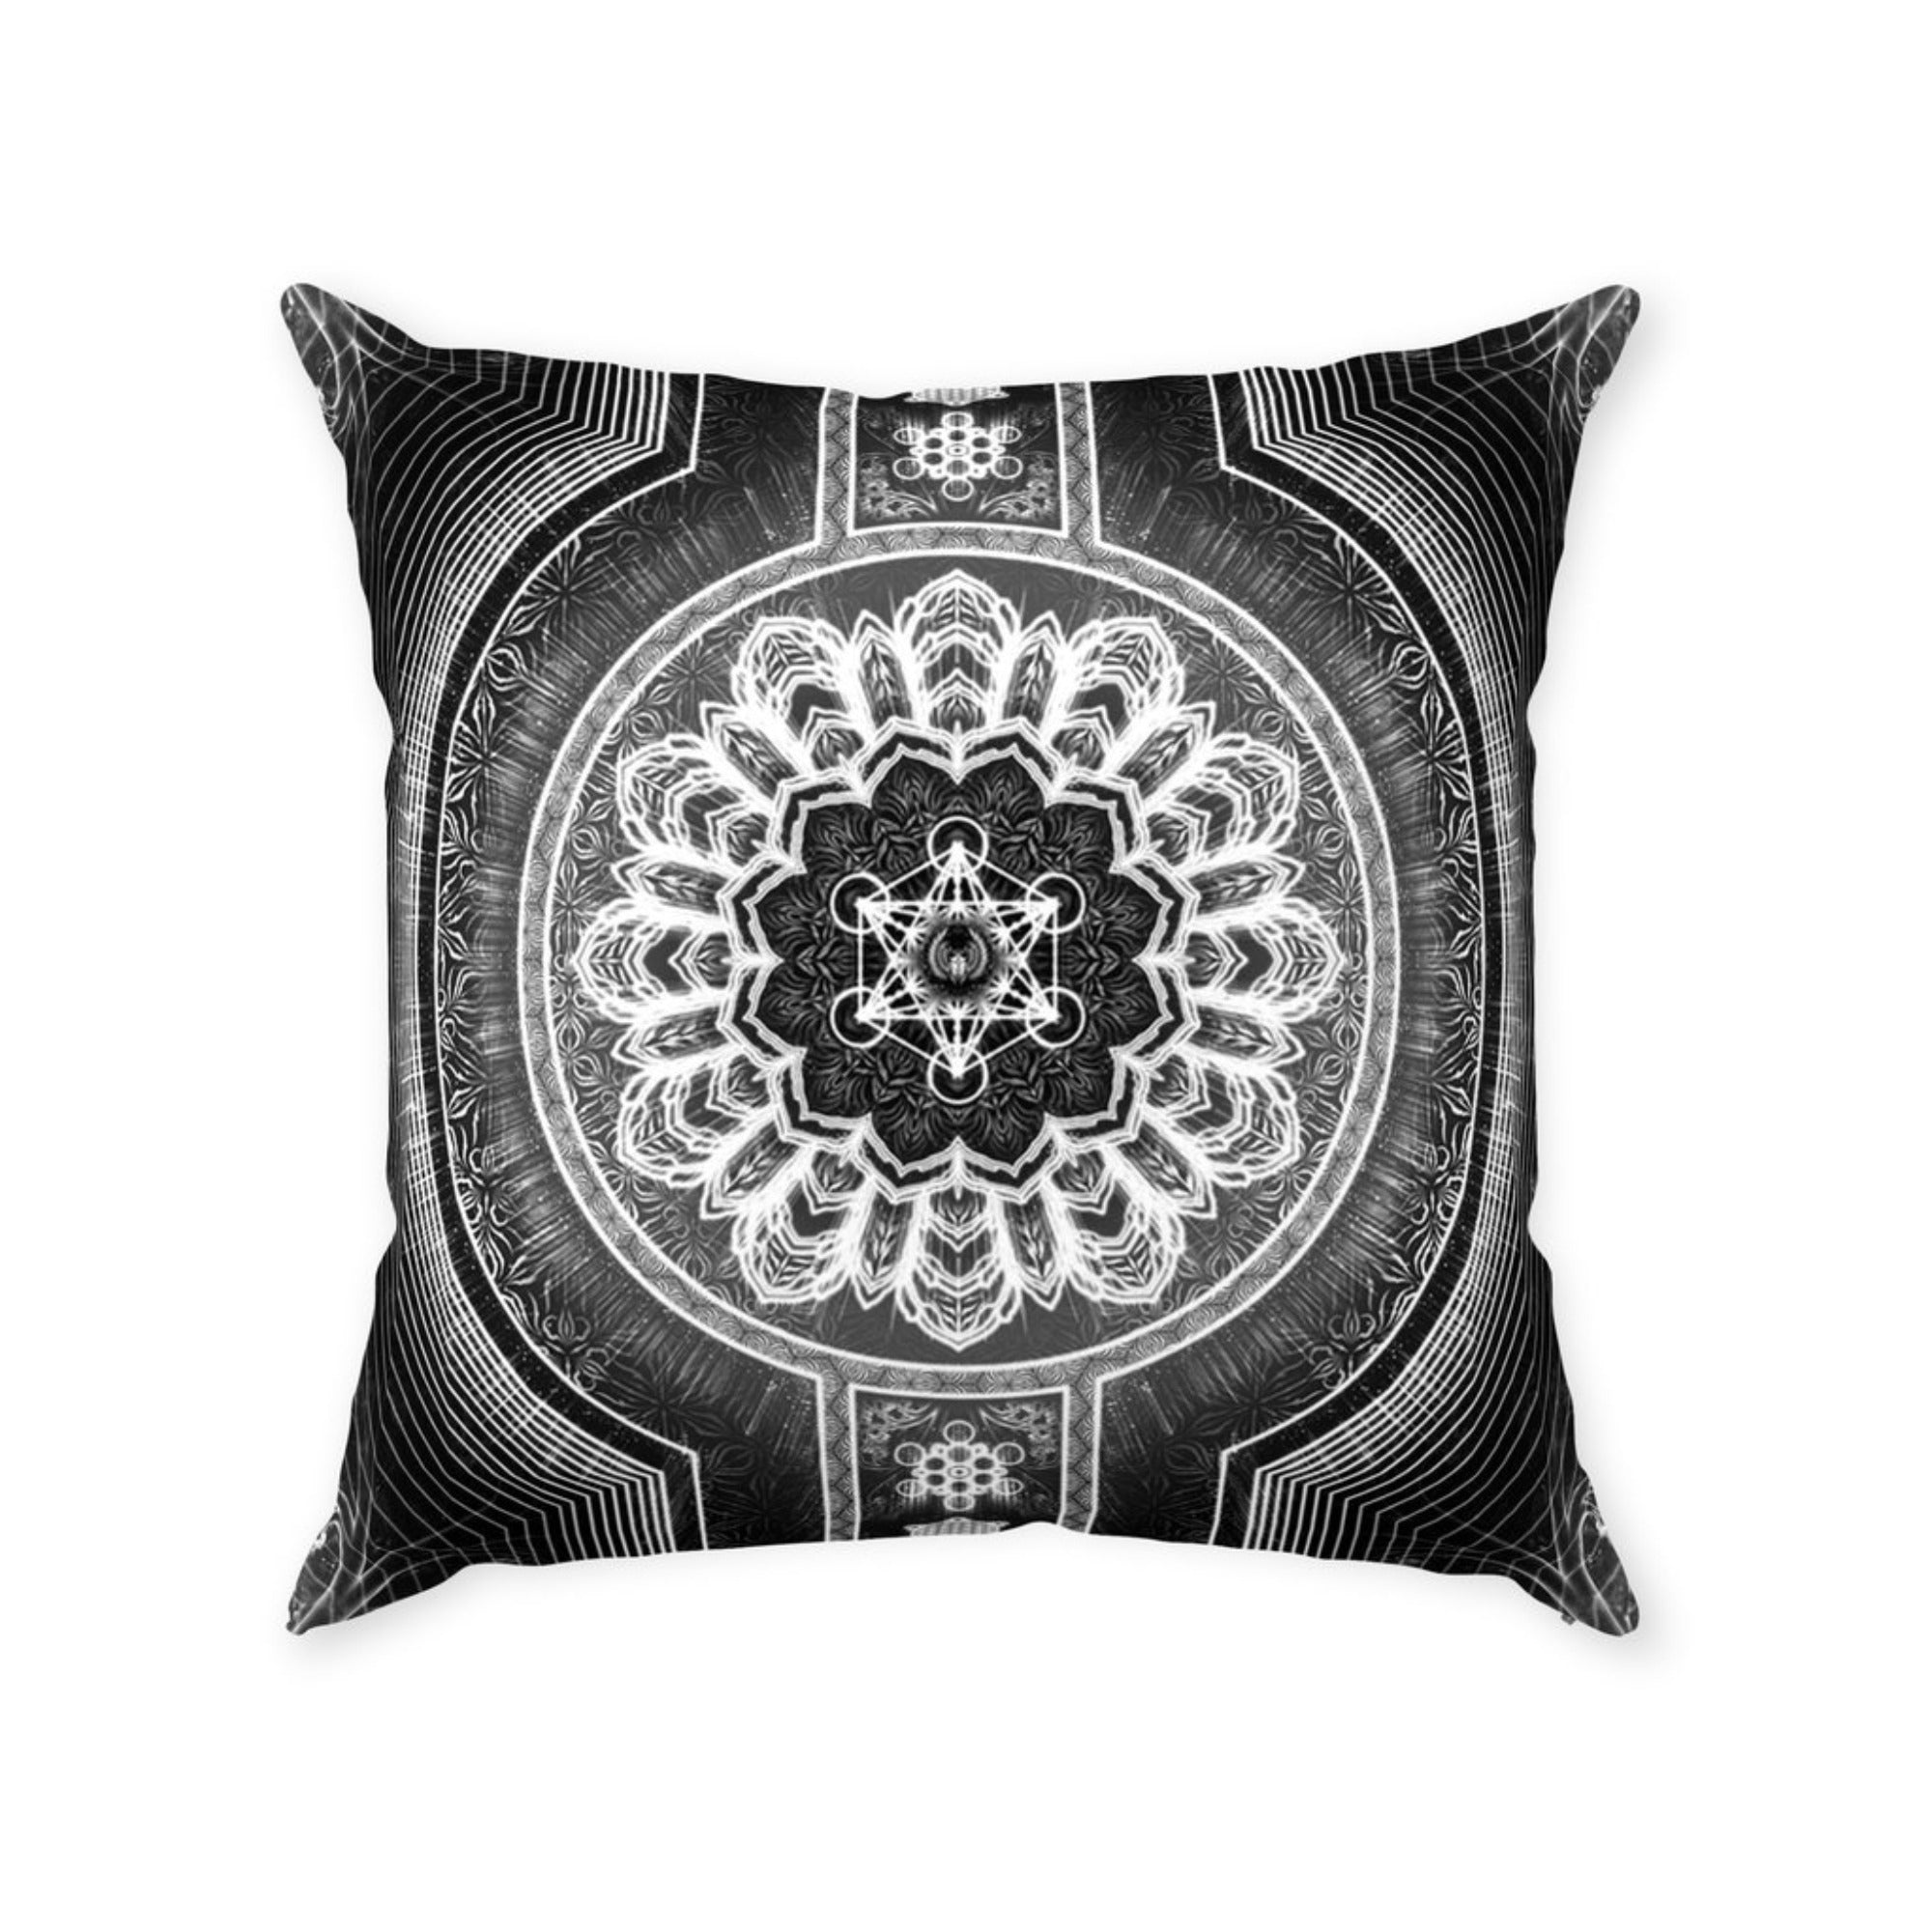 Stages of Light Throw Pillows With Zipper Suede 20x20 inch